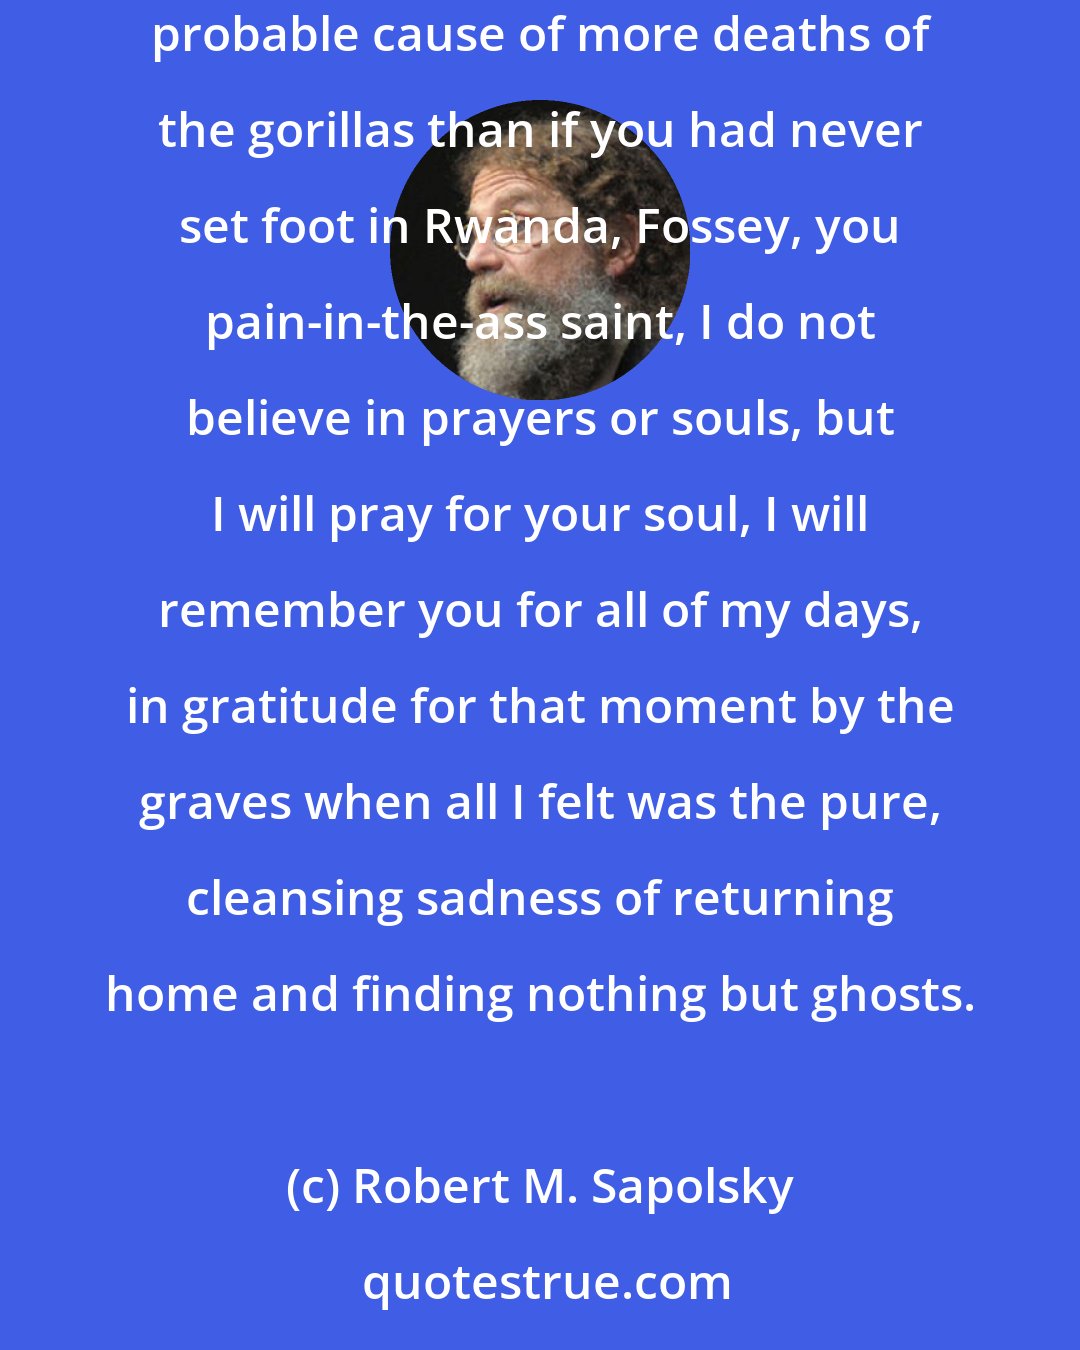 Robert M. Sapolsky: Fossey, Fossey, you cranky difficult strong-arming self-destructive misanthrope, mediocre scientist, deceiver of earnest college students, probable cause of more deaths of the gorillas than if you had never set foot in Rwanda, Fossey, you pain-in-the-ass saint, I do not believe in prayers or souls, but I will pray for your soul, I will remember you for all of my days, in gratitude for that moment by the graves when all I felt was the pure, cleansing sadness of returning home and finding nothing but ghosts.